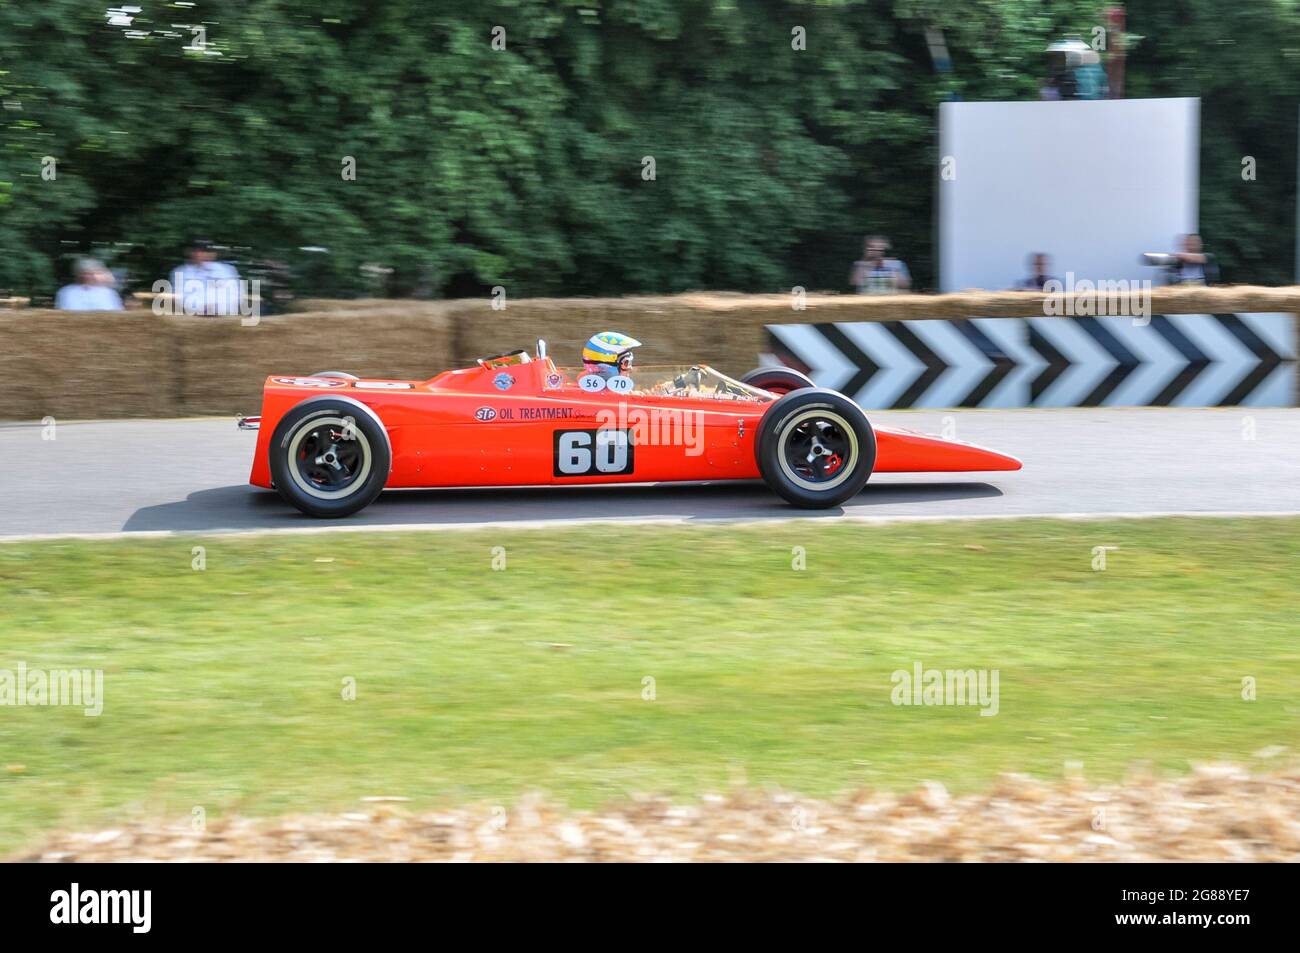 Lotus 56 gas turbine-powered four-wheel-driven racing car at the Goodwood Festival of Speed 2013. STP-backed entry in the Indianapolis 500. 4WD car Stock Photo